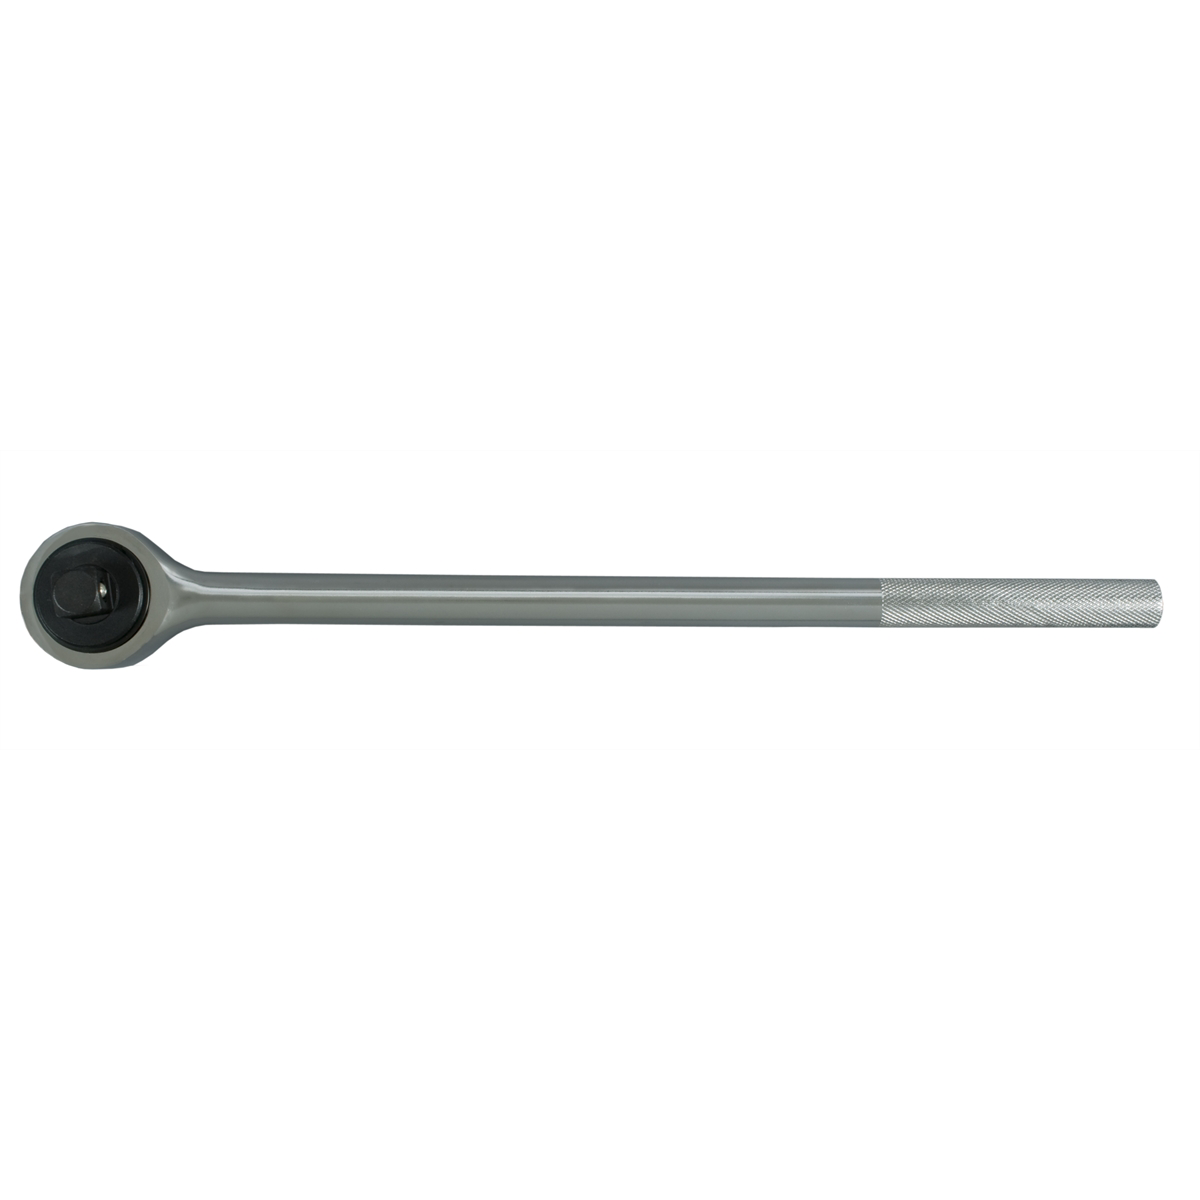 24" Rev Ratchet with 3/4" Attachment